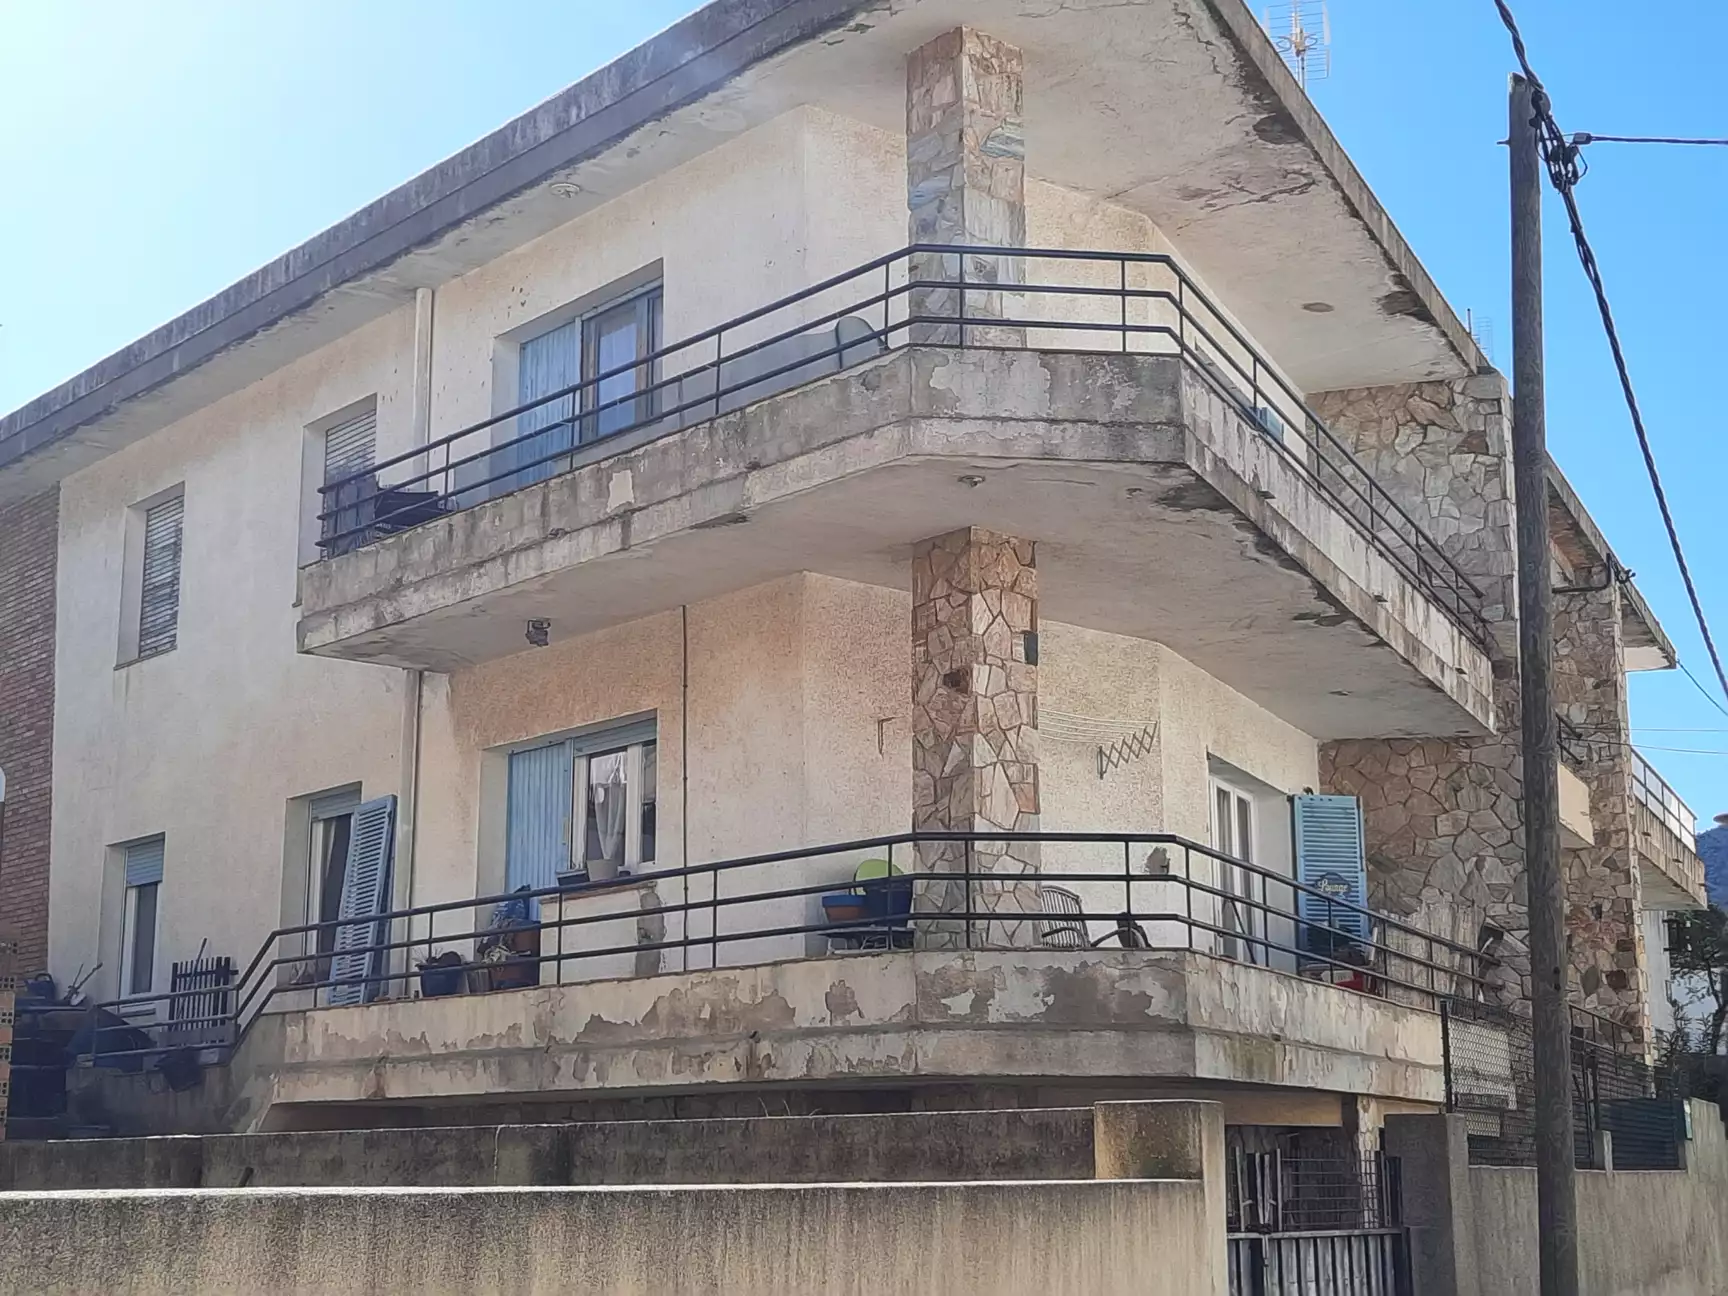 &quot;Investors! Excellent opportunity, 2 floors just 200 meters from the beach in Llança. Don't miss thi